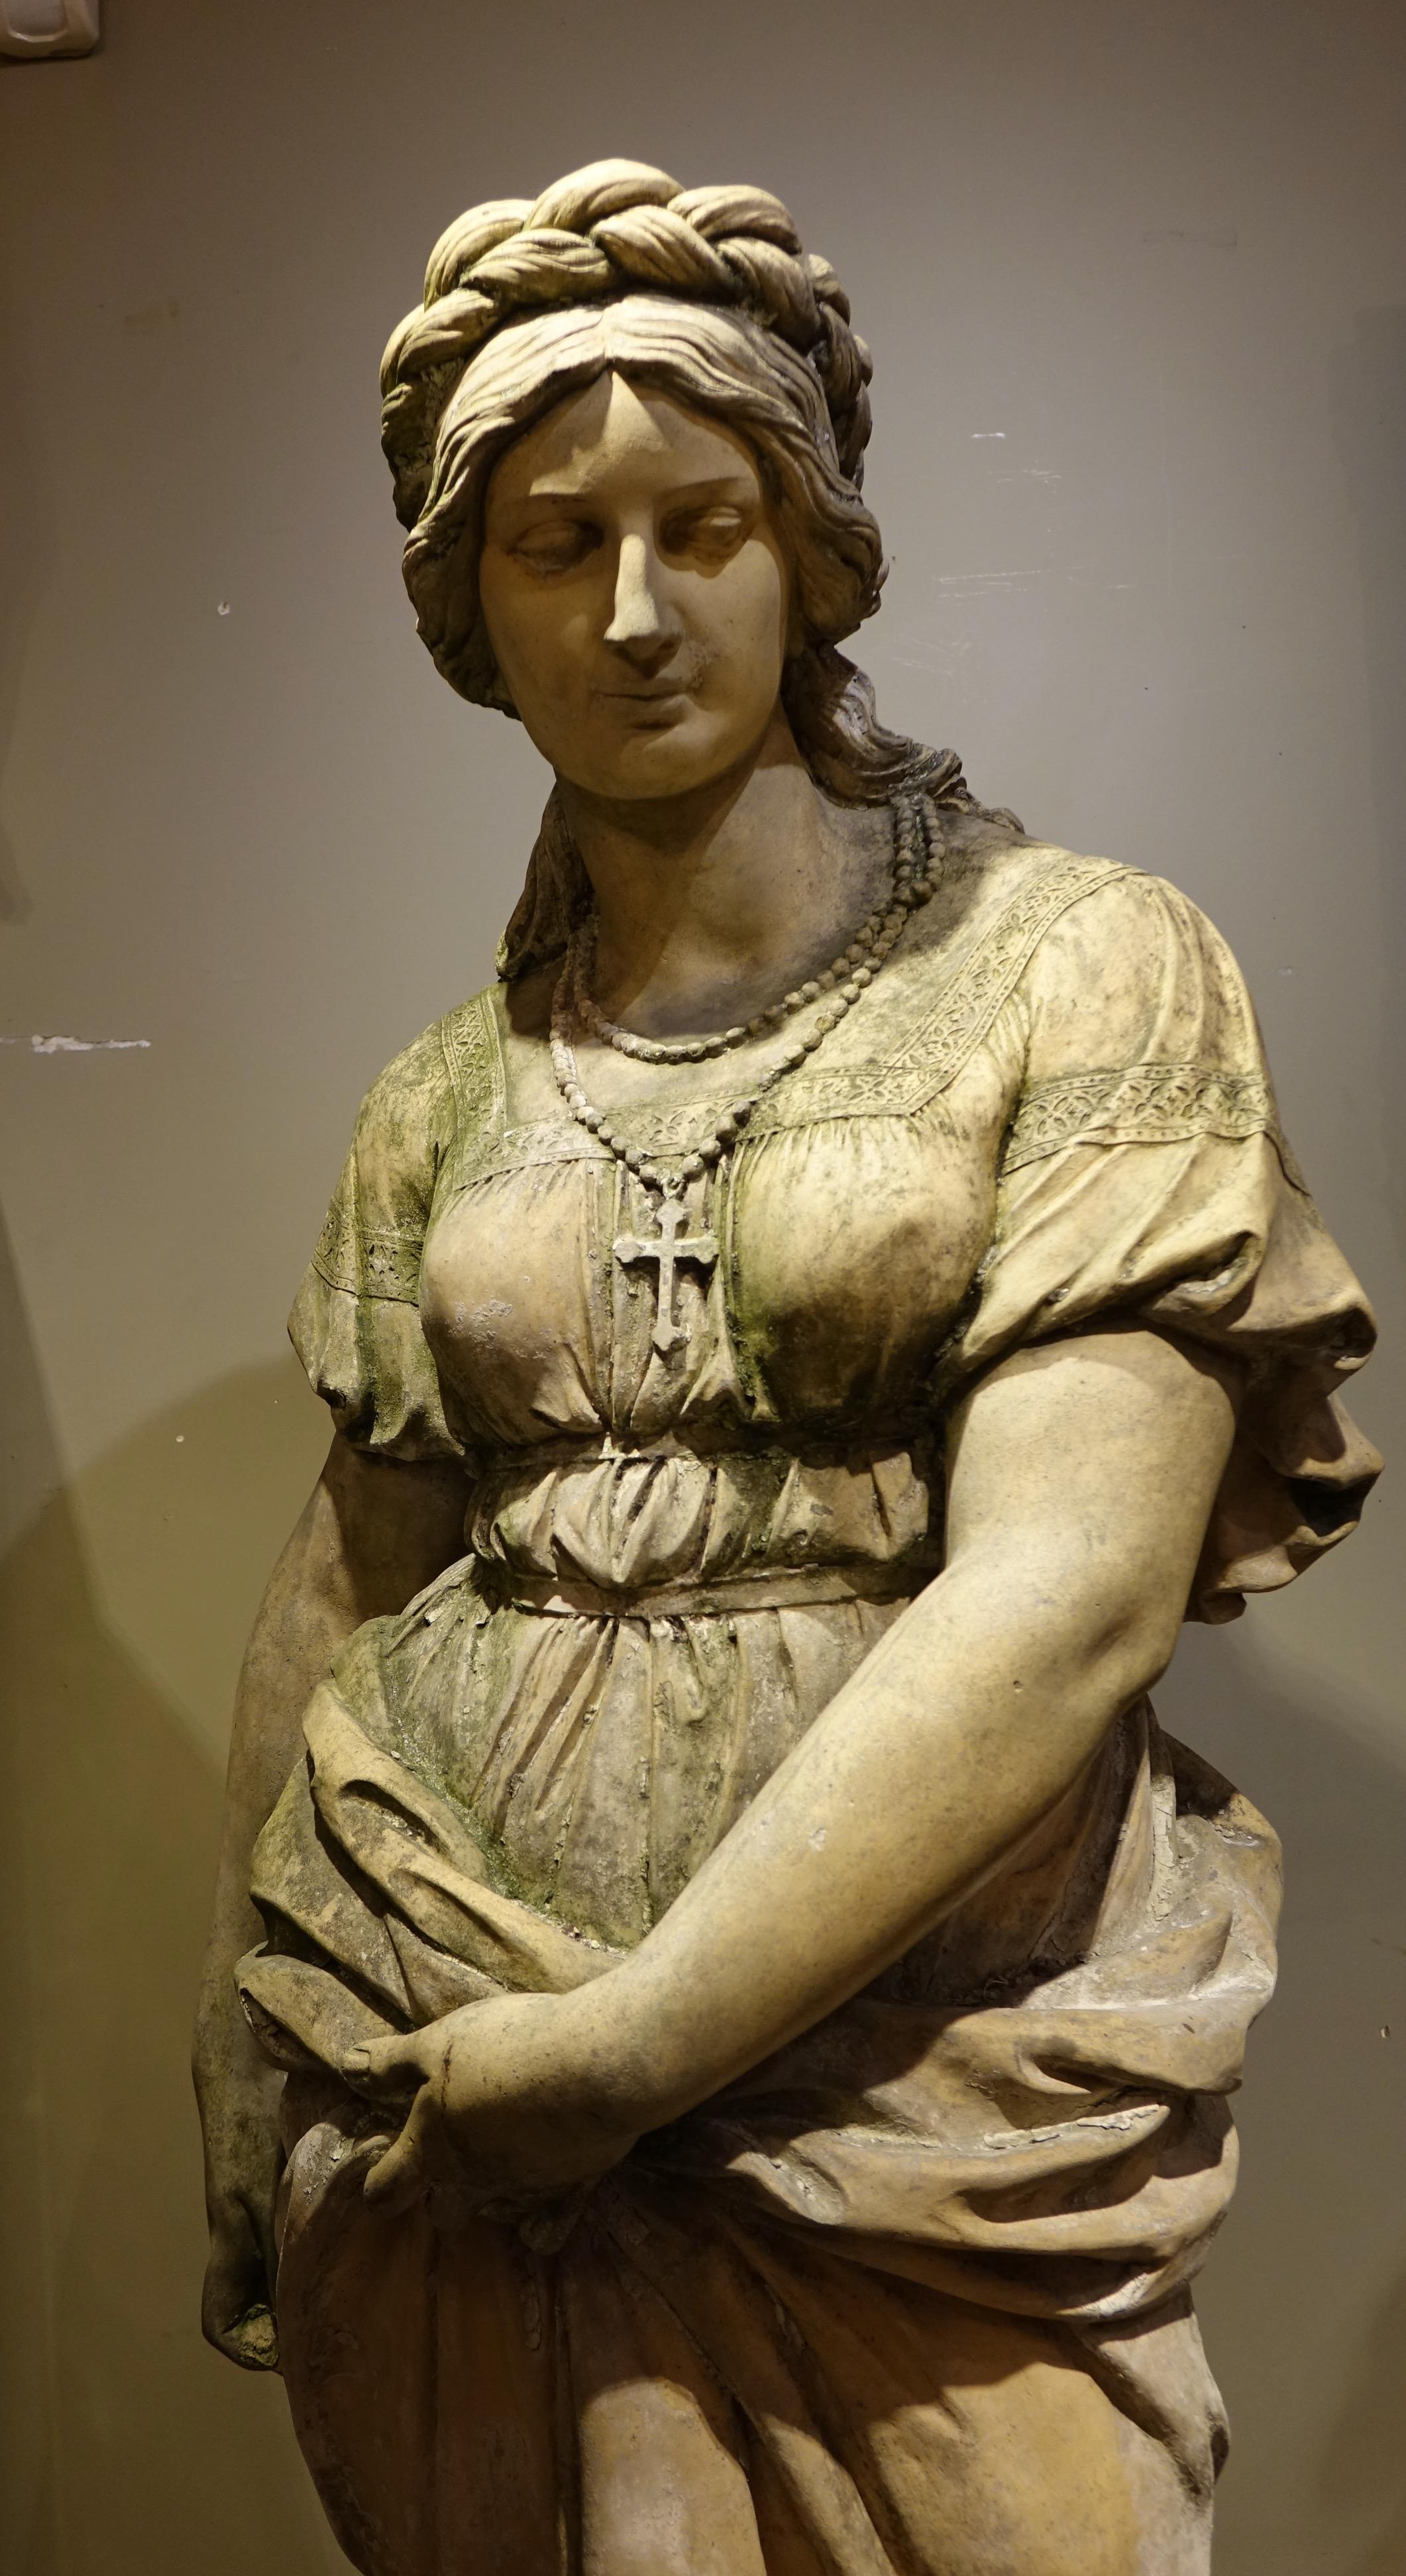 Very large terracotta ( 1.70m) depicting a young woman raising her garment slightly with her left arm to climb down from a rock.
The right arm close to the body, the hand must have been holding a missing element.
Her hair is braided, accentuating